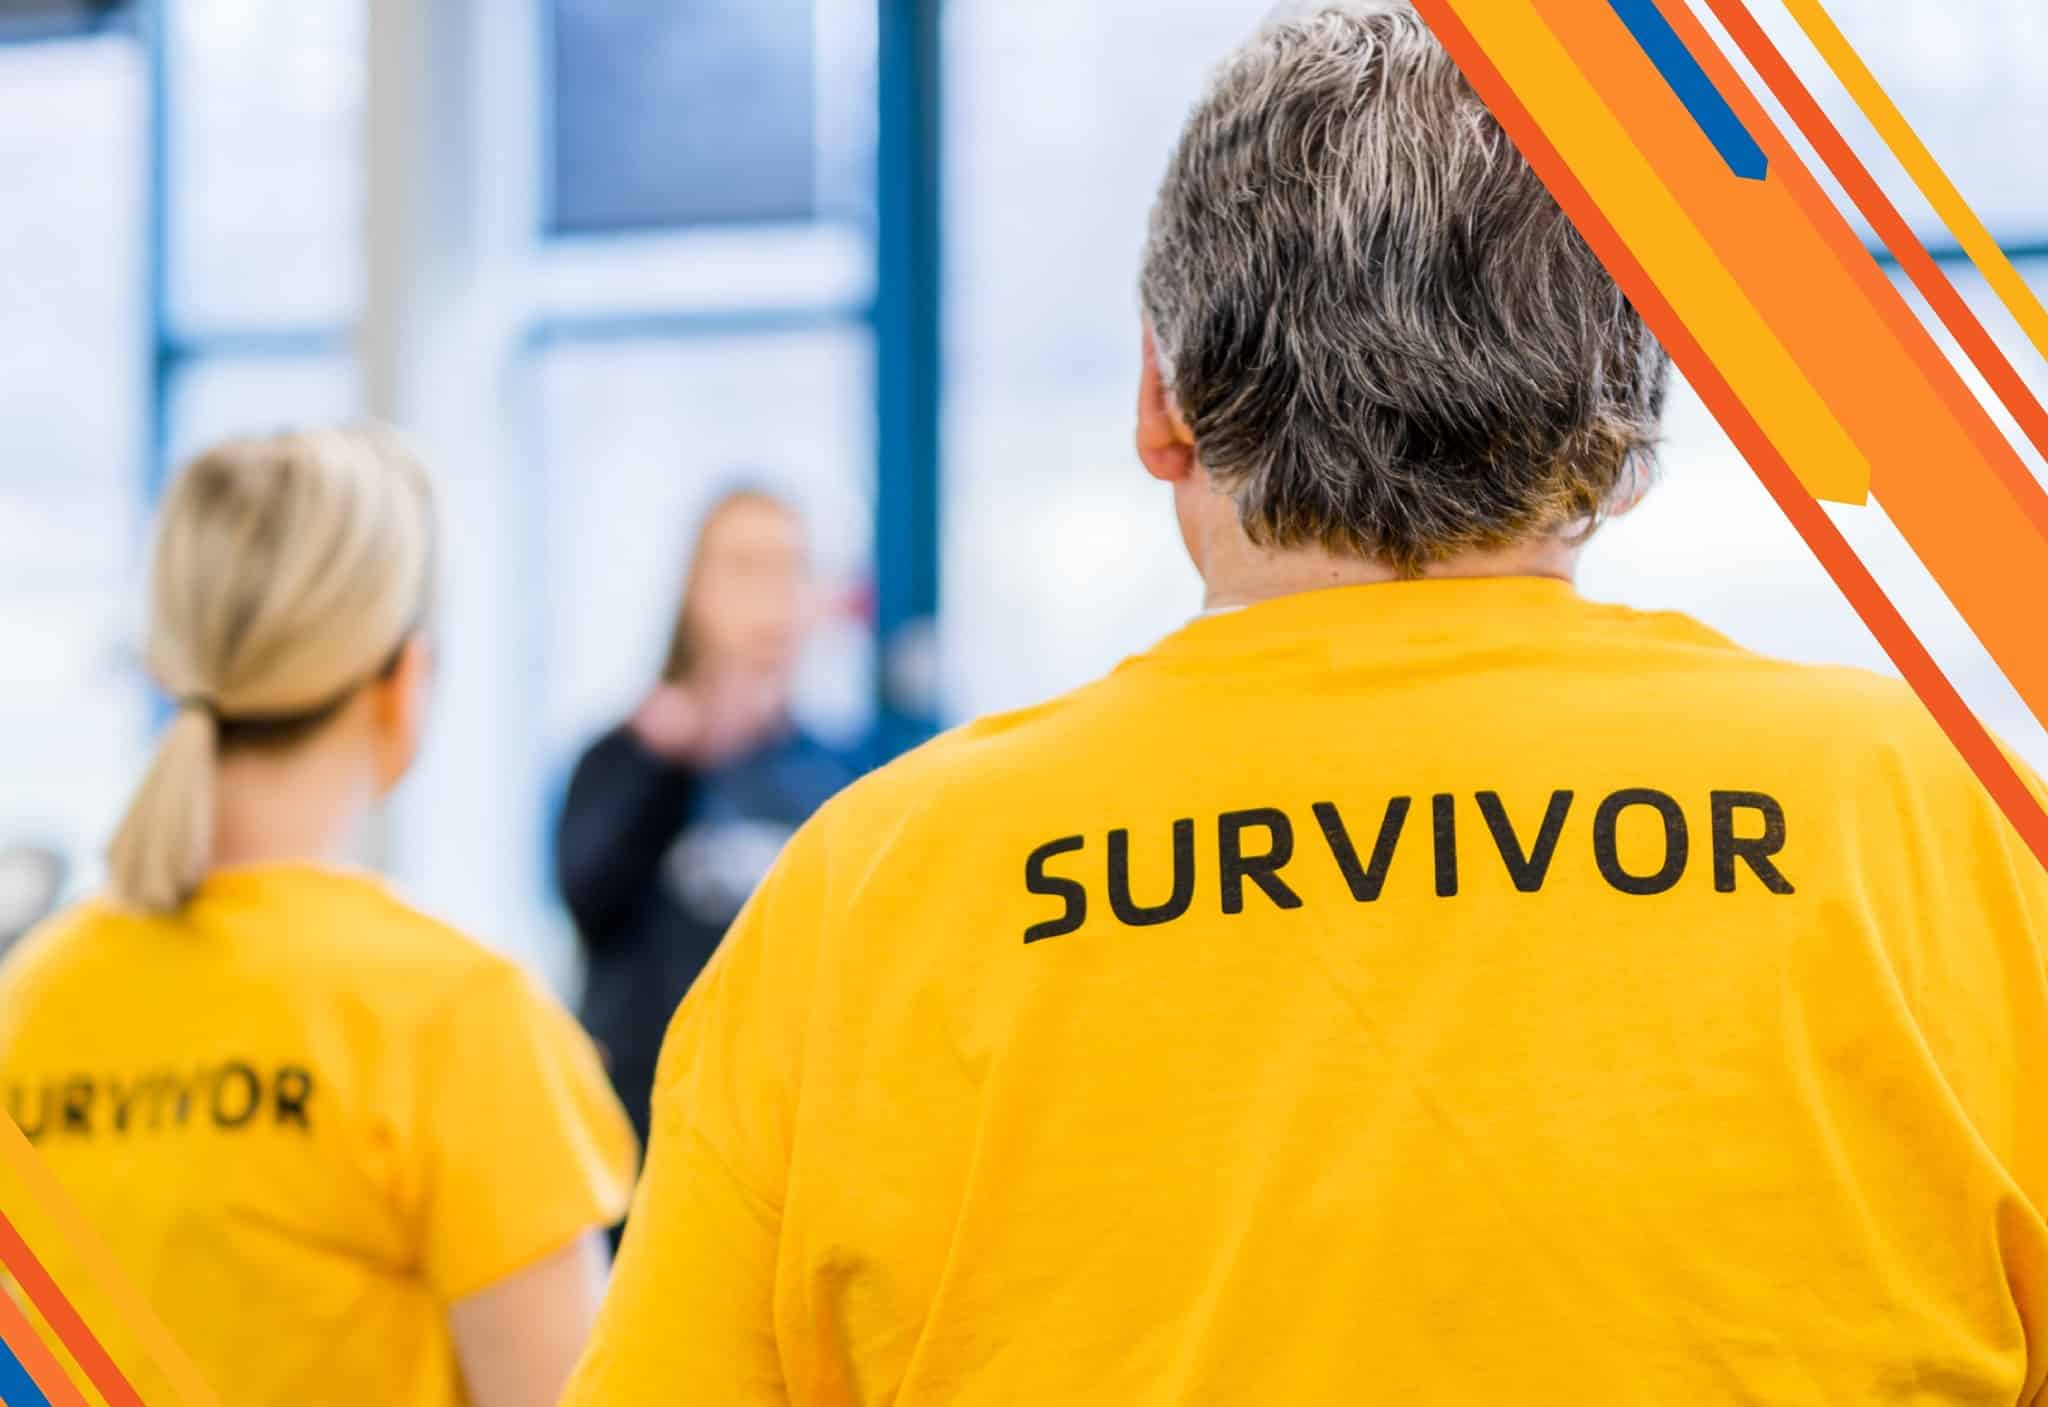 A close-up view from behind of a person wearing a yellow shirt with the word 'SURVIVOR' printed on the back. Another person in a similar shirt is visible in the background, slightly out of focus.